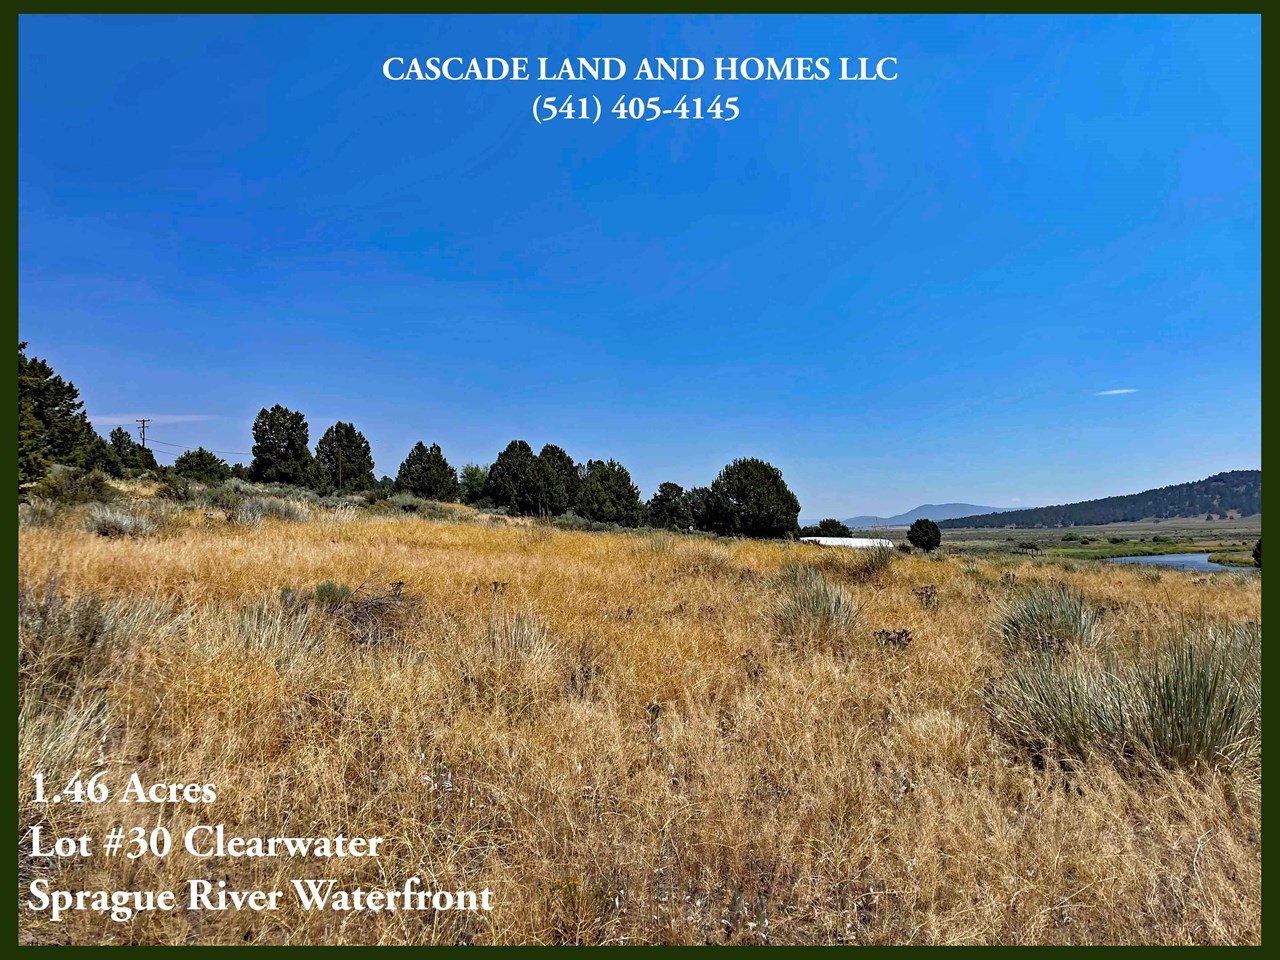 the property slopes gently down toward the valley and is mostly cleared of trees. there is some sage brush, rabbit brush, and native grasses blanketing the property.